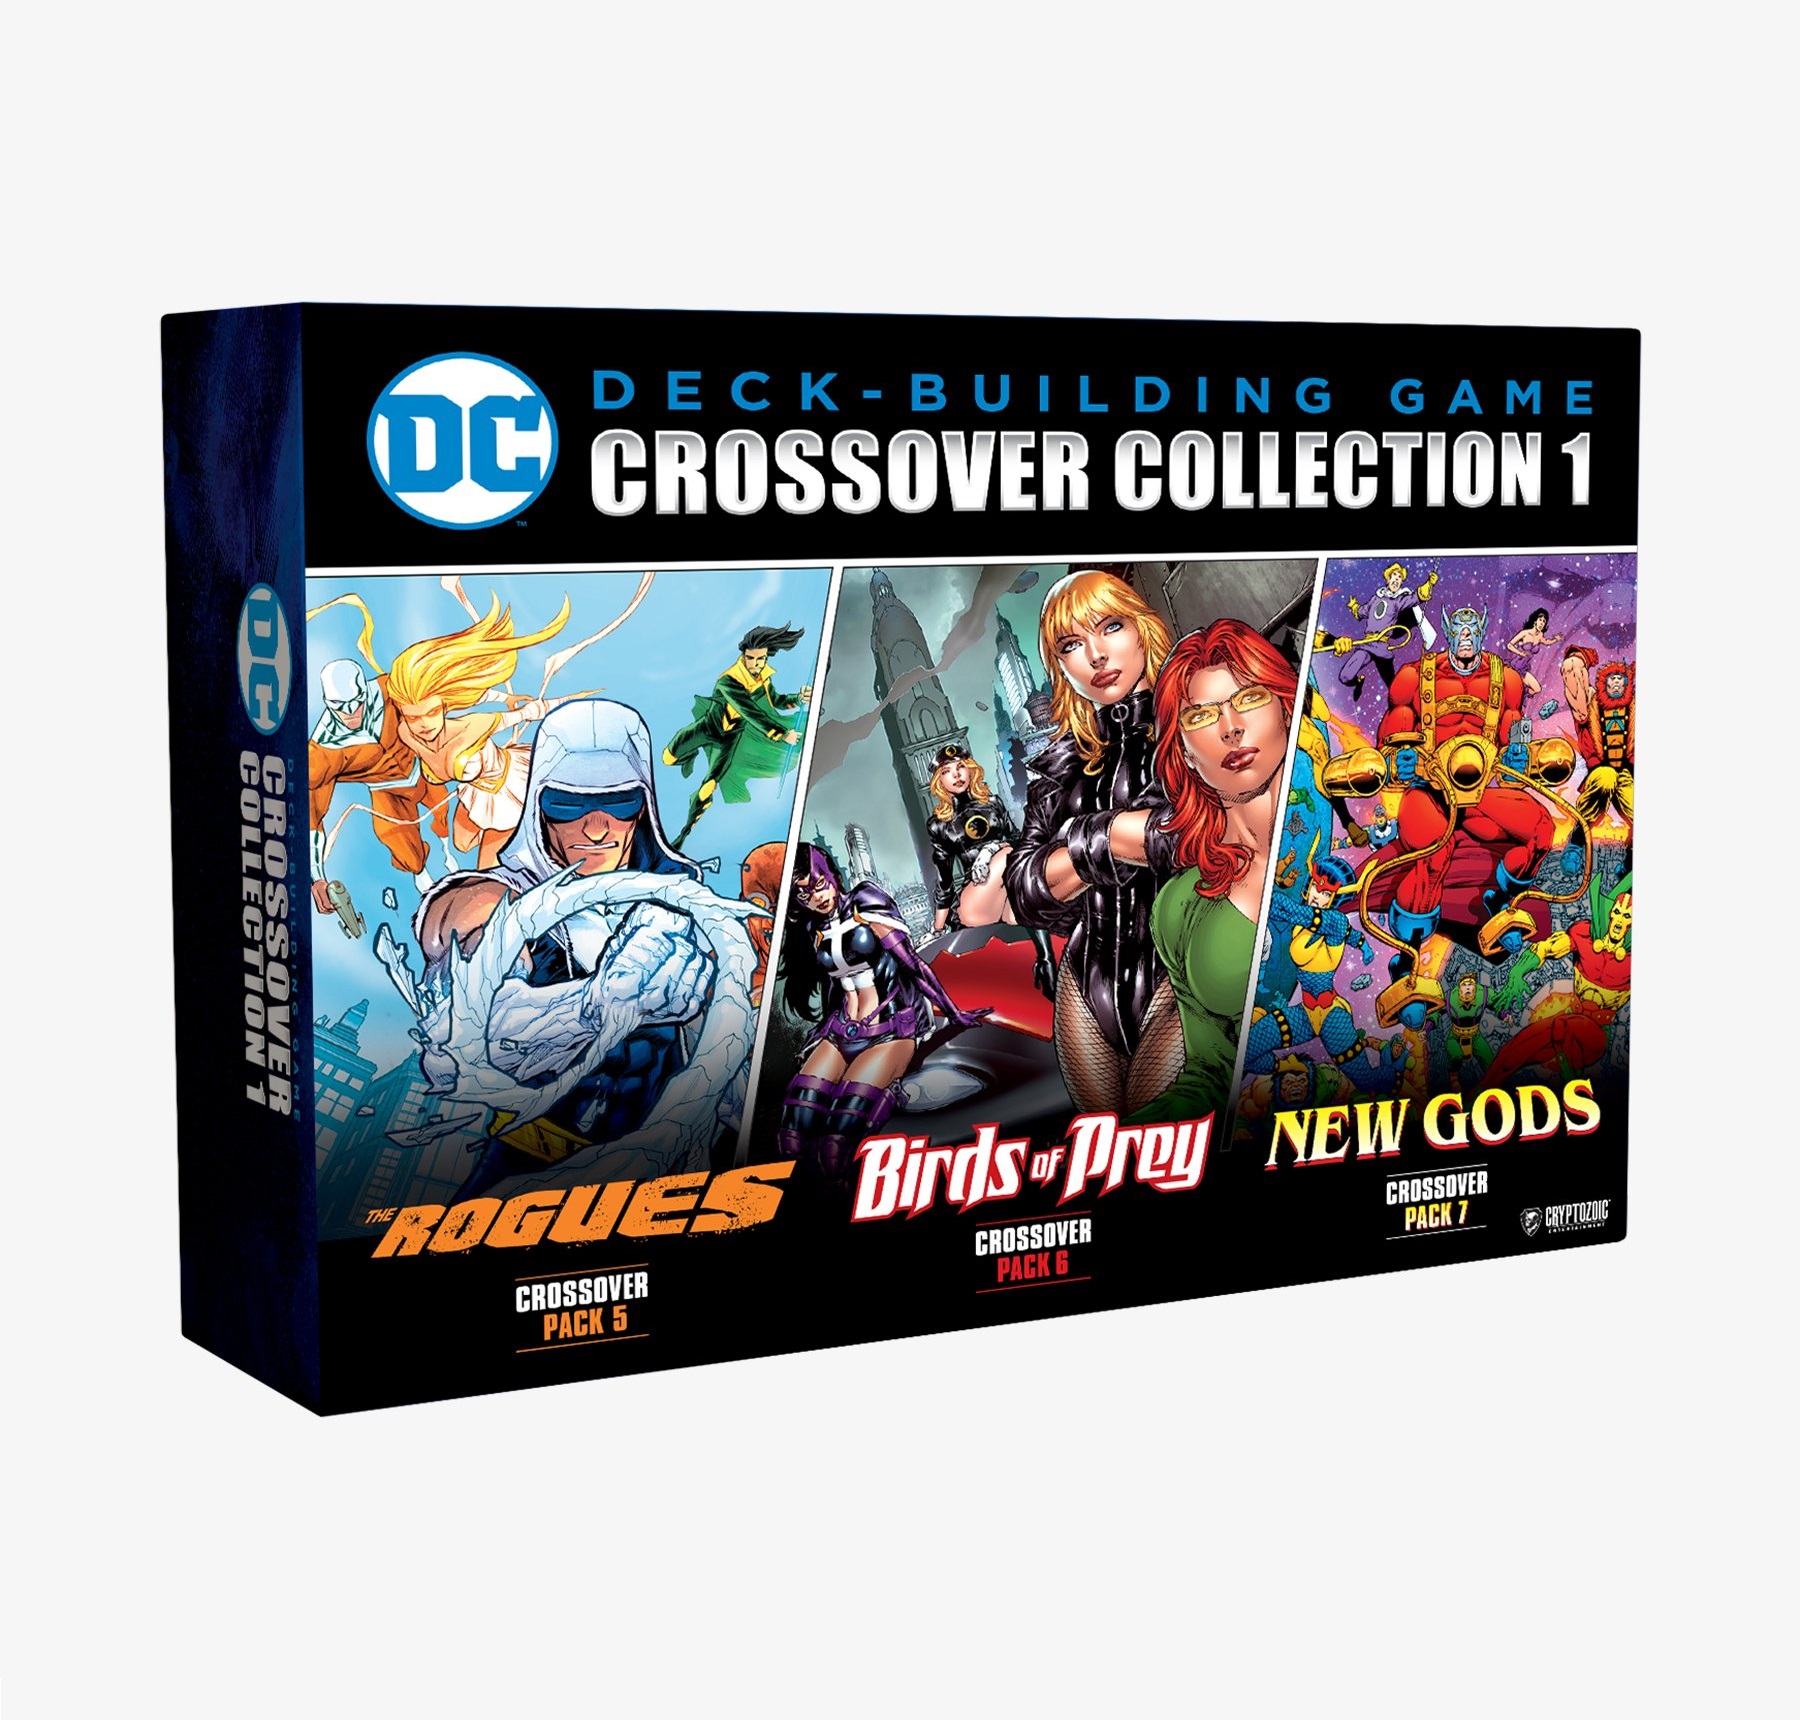 DC Comics Deck-Building Game: Crossover Collection 